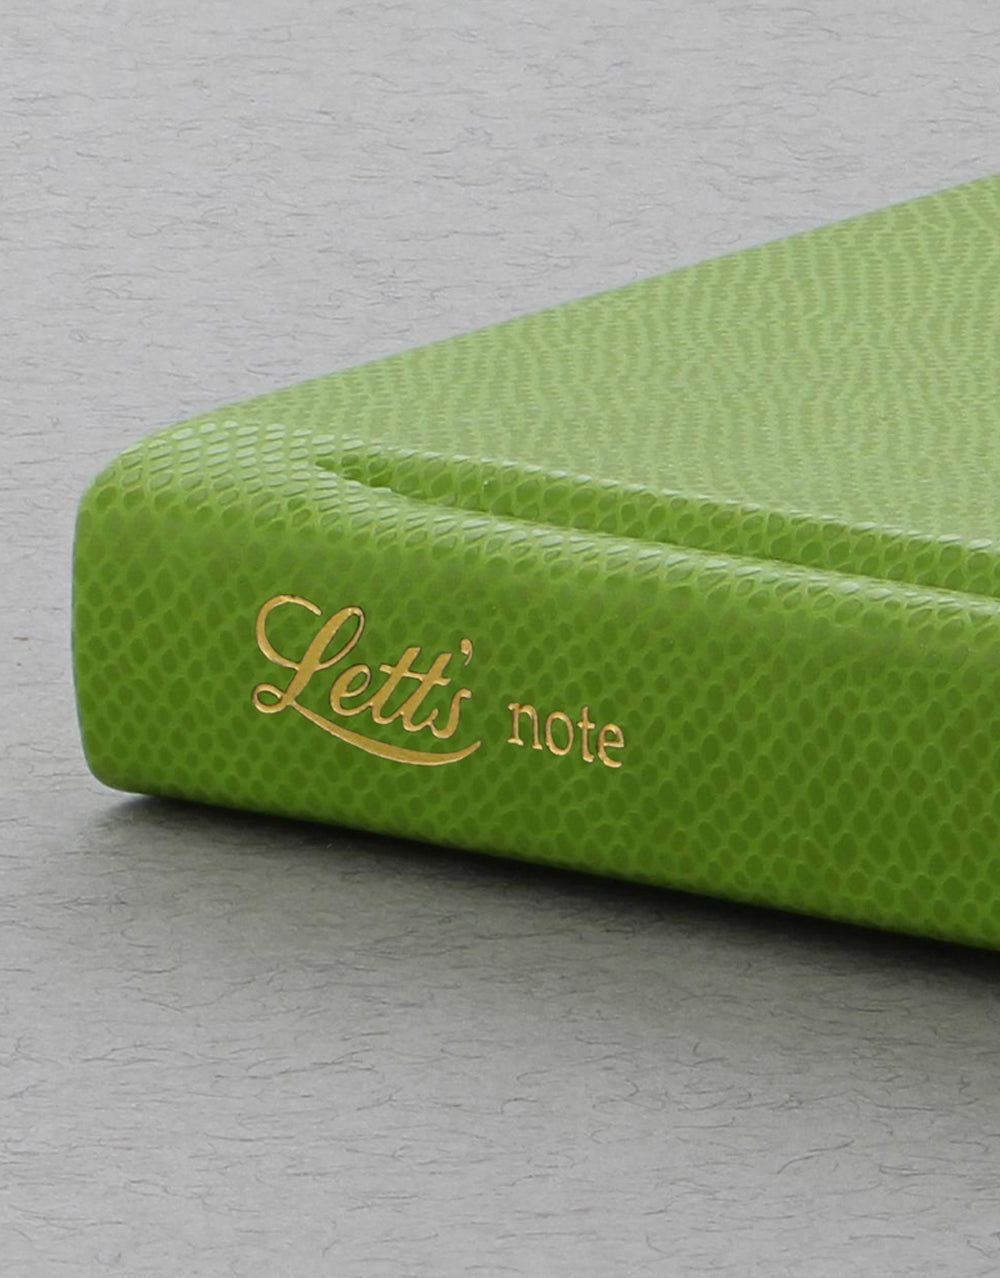 Legacy Book Ruled Notebook Green#colour_green